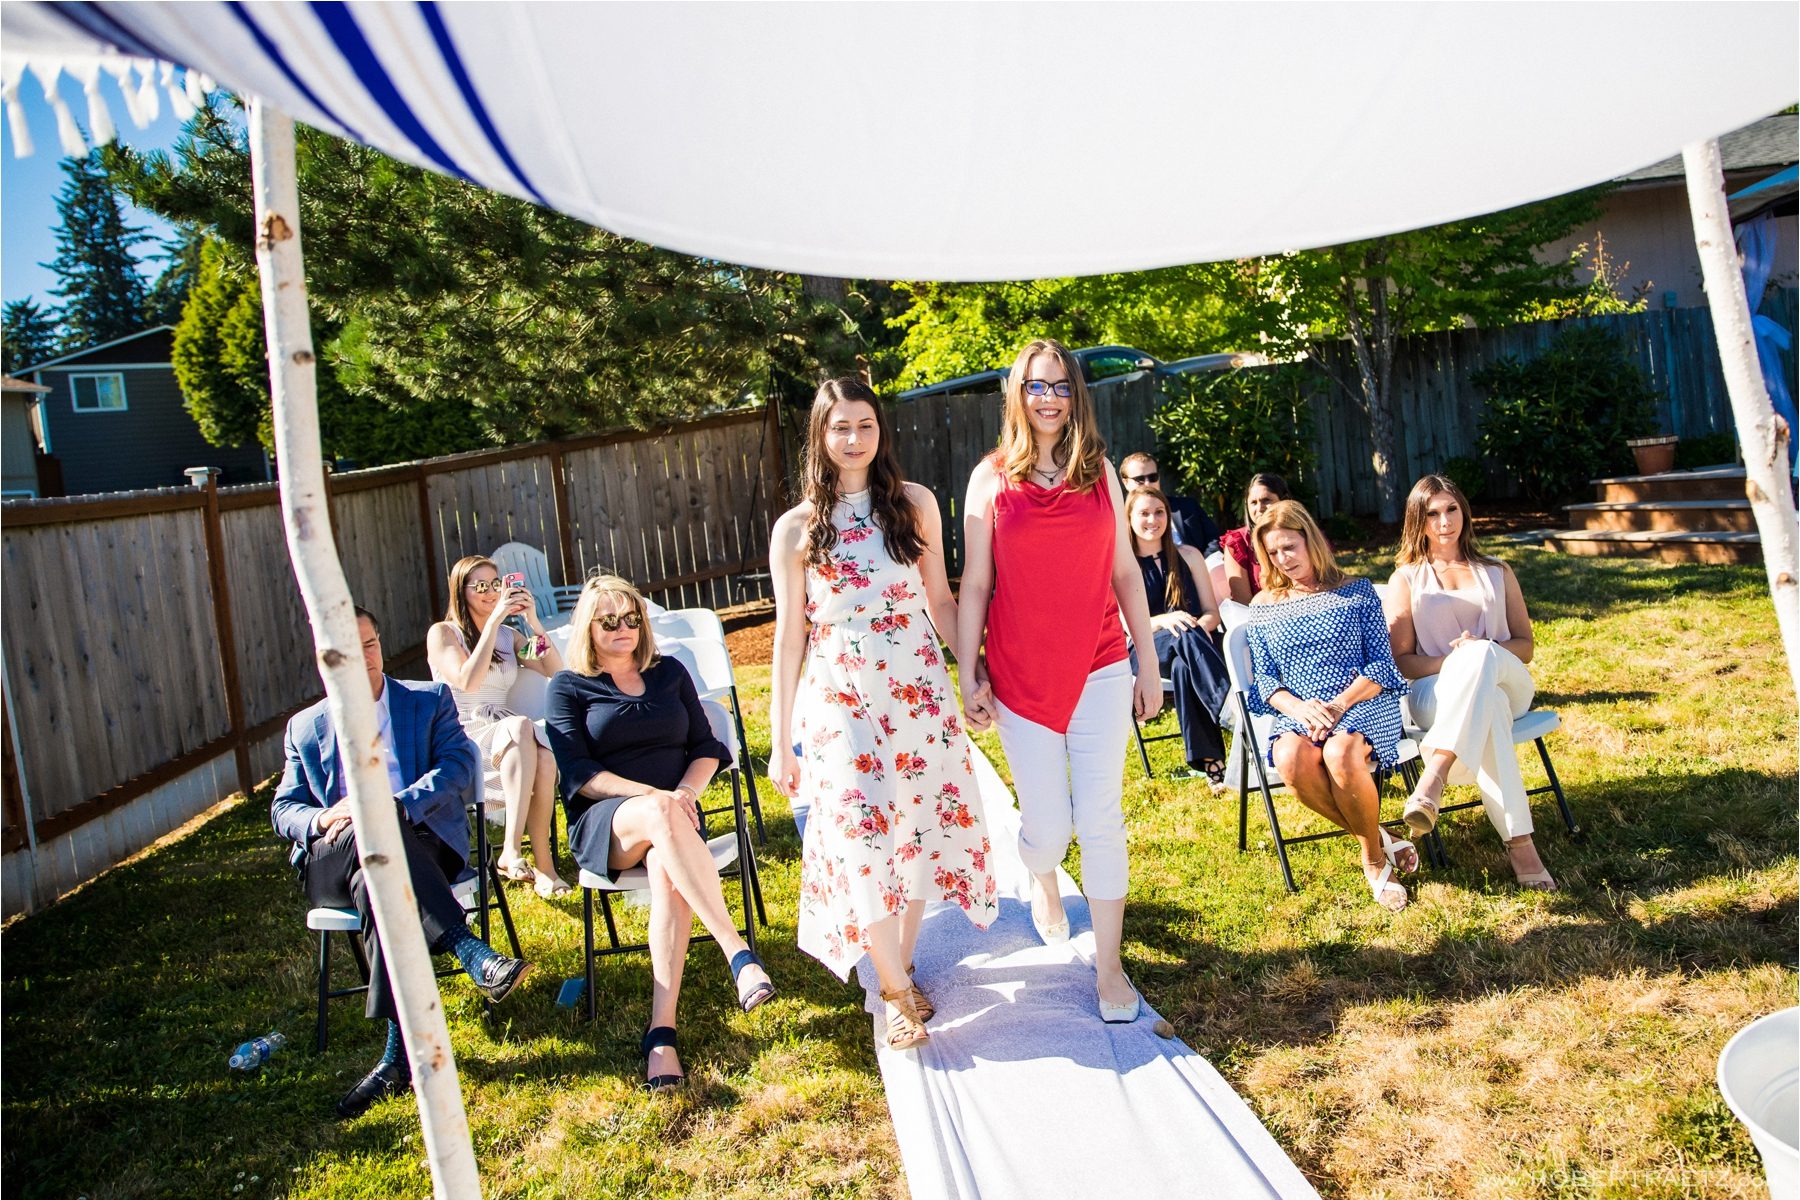 A backyard, social distanced, Zoom wedding in Kirkland Seattle, Washington, during the Covid-19 pandemic photographed by the destination wedding photographer, Robert Paetz.